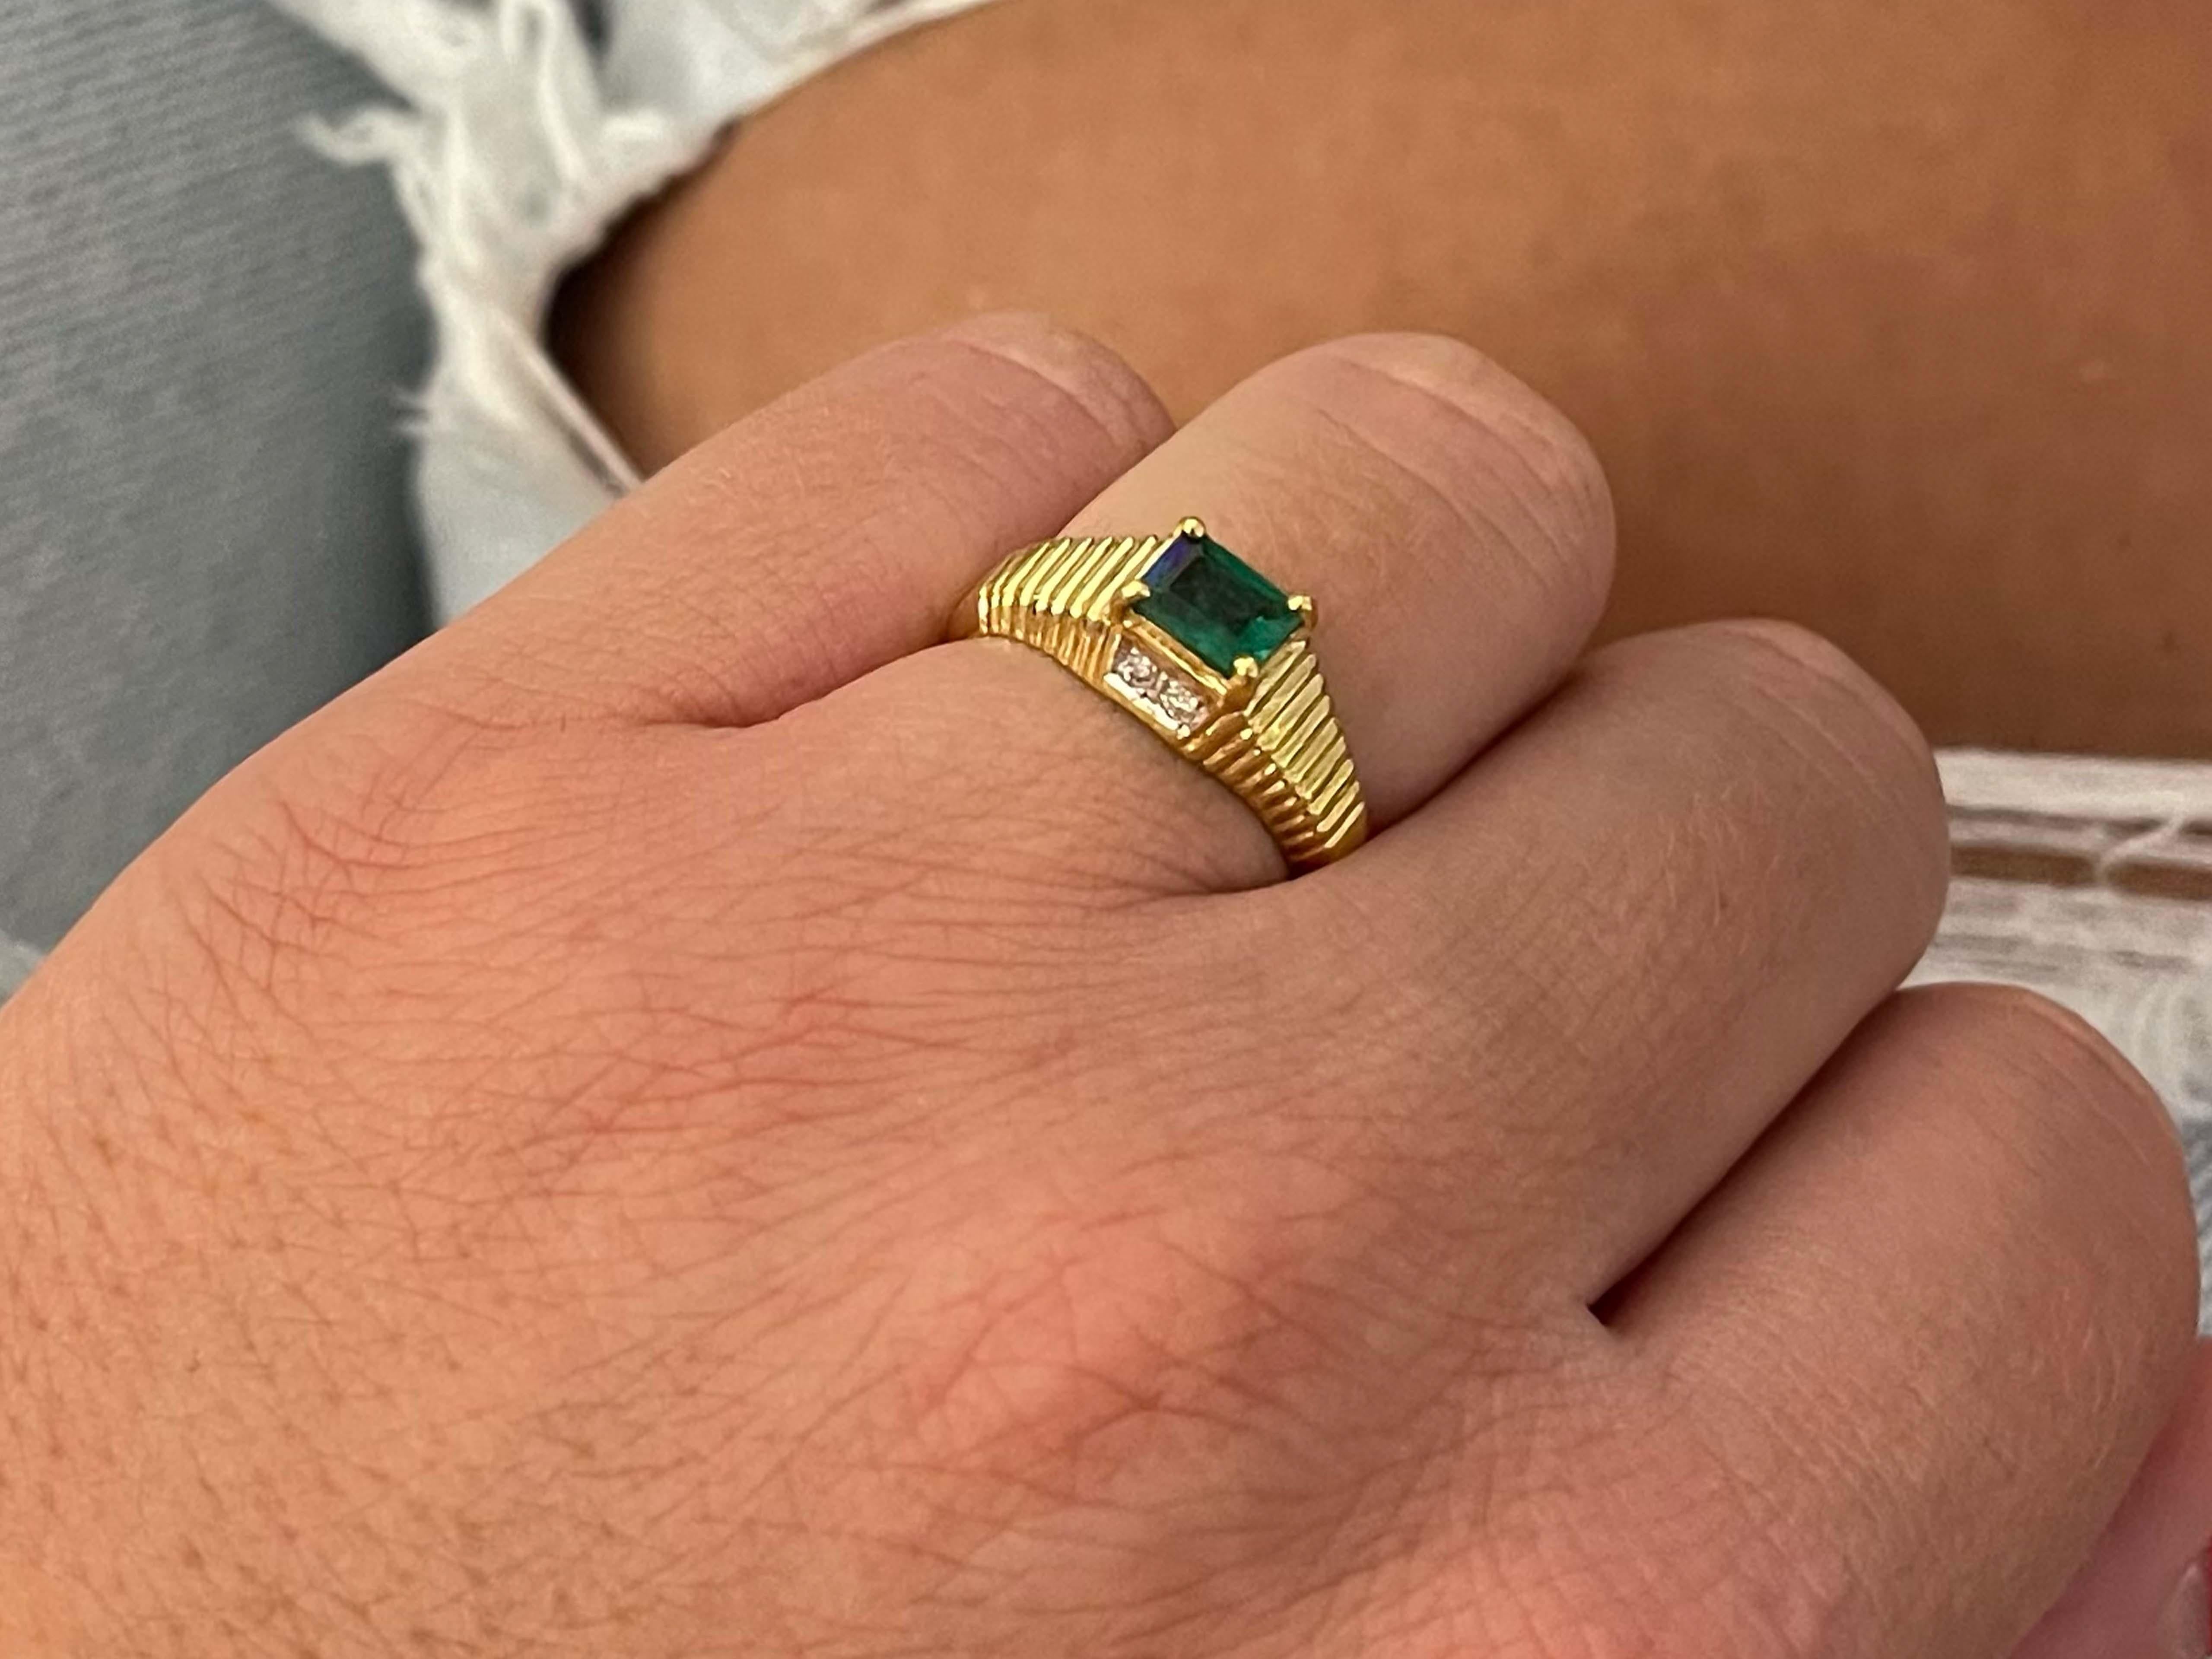 Item Specifications:

Metal: 18K Yellow Gold

Style: Statement Ring

Ring Size: 5.5 (resizing available for a fee)

Total Weight: 4.6 Grams

Ring Height: 7.83 mm

Gemstone Specifications:

Gemstone: 1 Green Emerald

Shape: Rectangle

Emerald